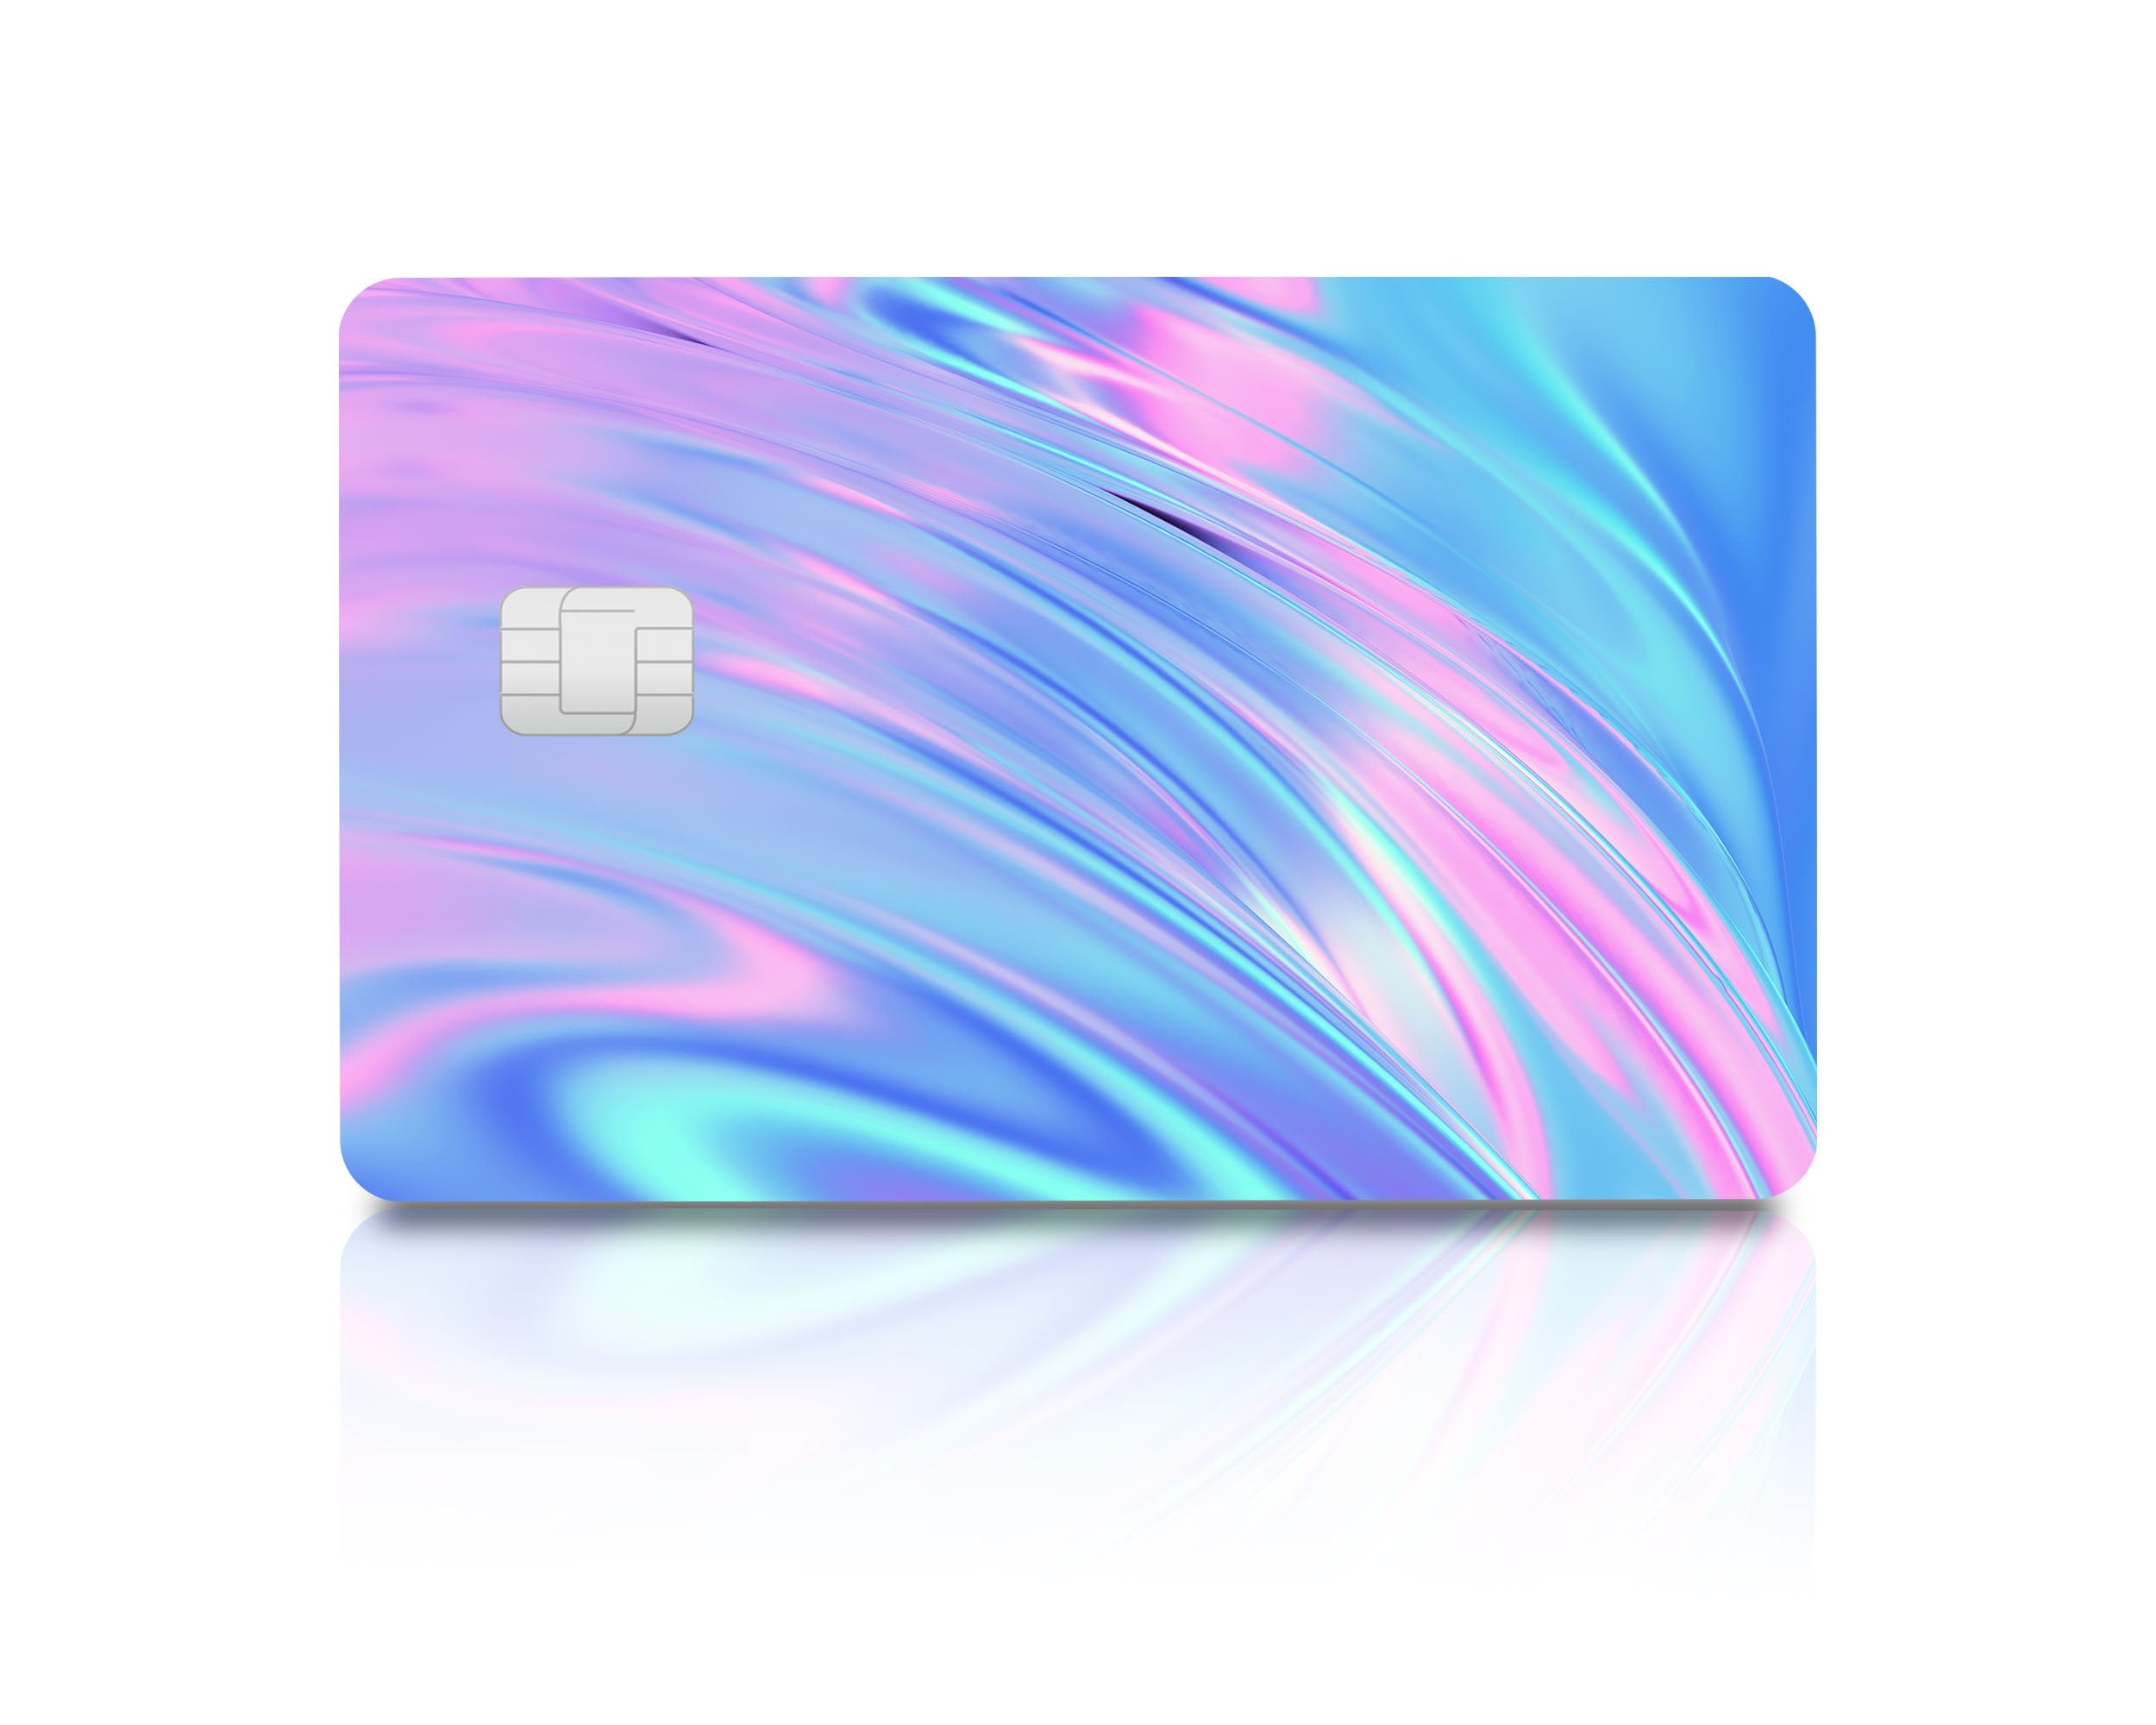 New SKIN IT Card Skins : AMEX BLACK Collection (Stickers For ATM or Be